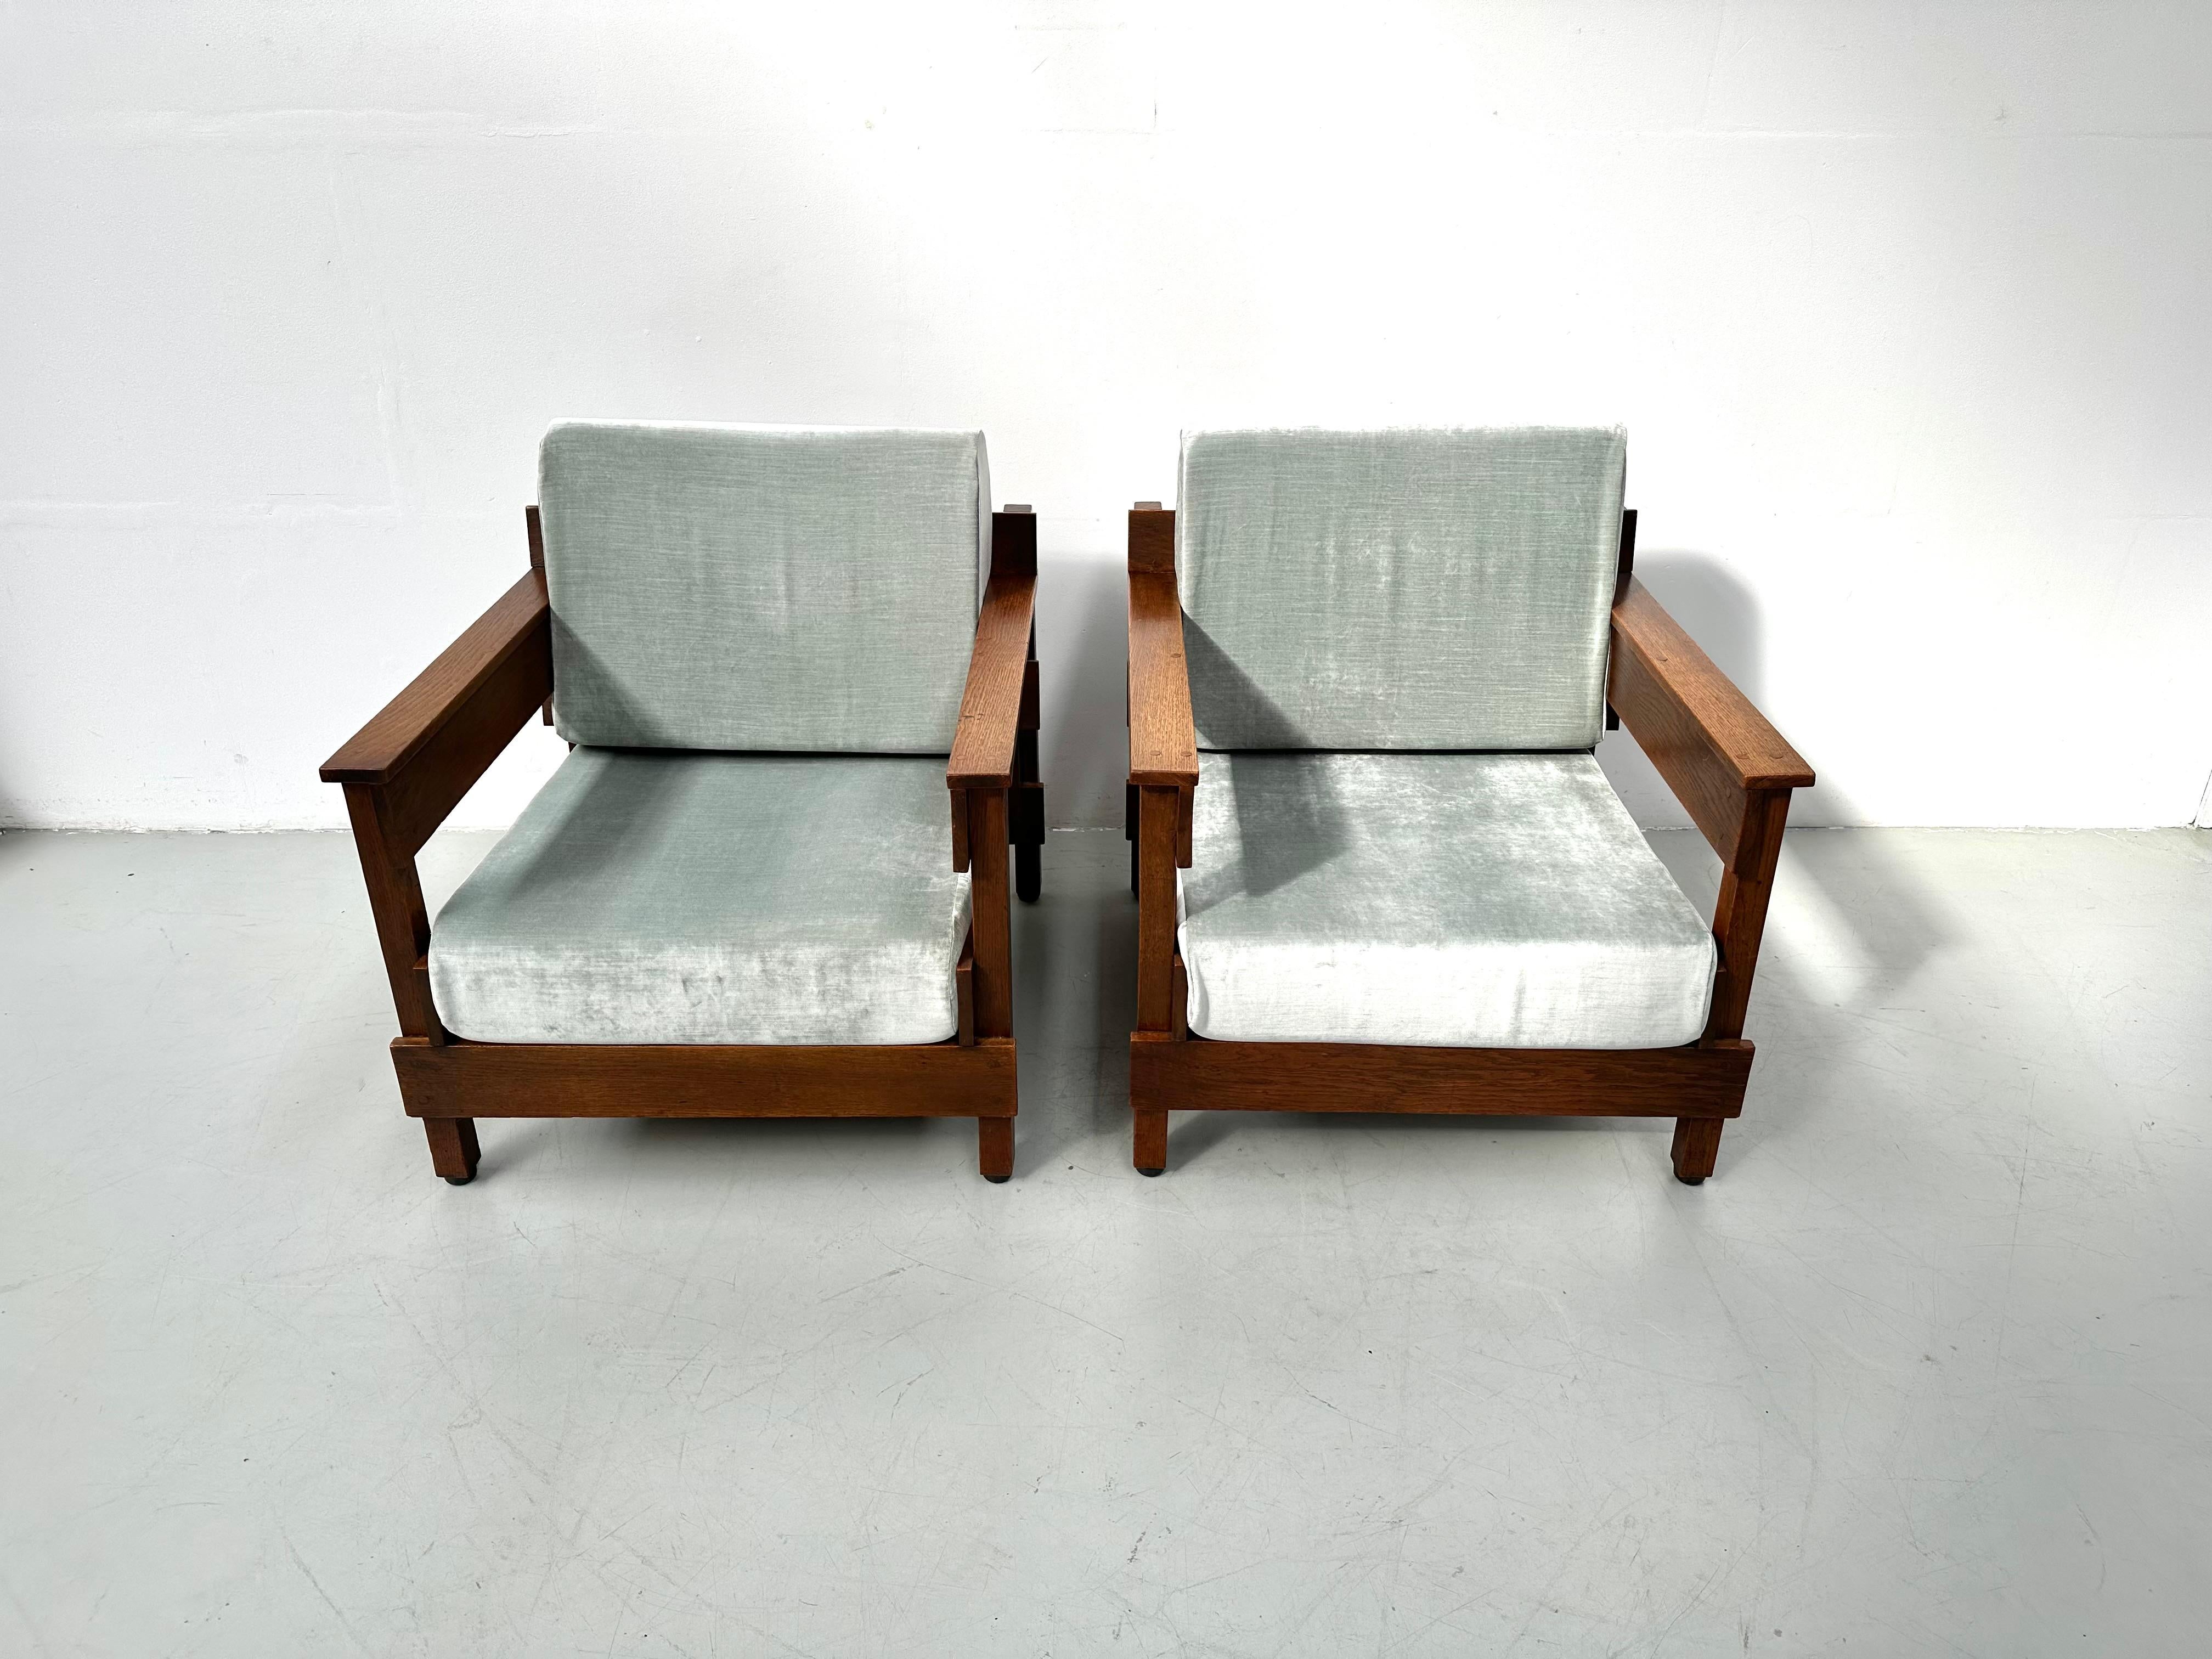 Dutch Mid Century Brutalist Oak Armchairs by Paul Bromberg for Metz & Co, 1950s. 3